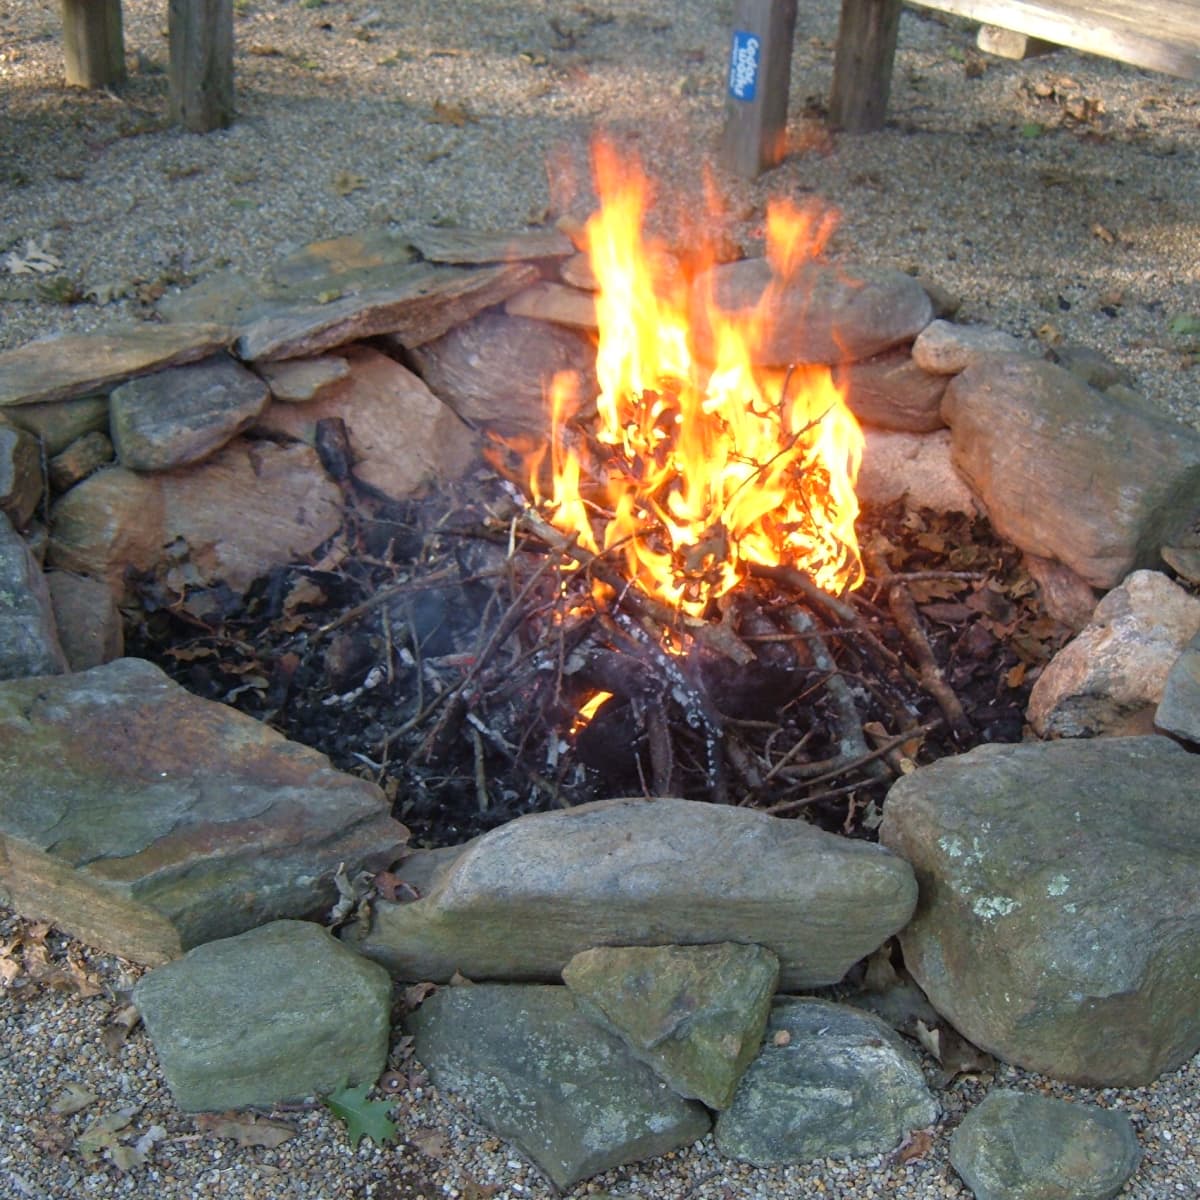 How To Build A Fieldstone Fire Pit, Is It Legal To Build A Fire Pit In My Backyard